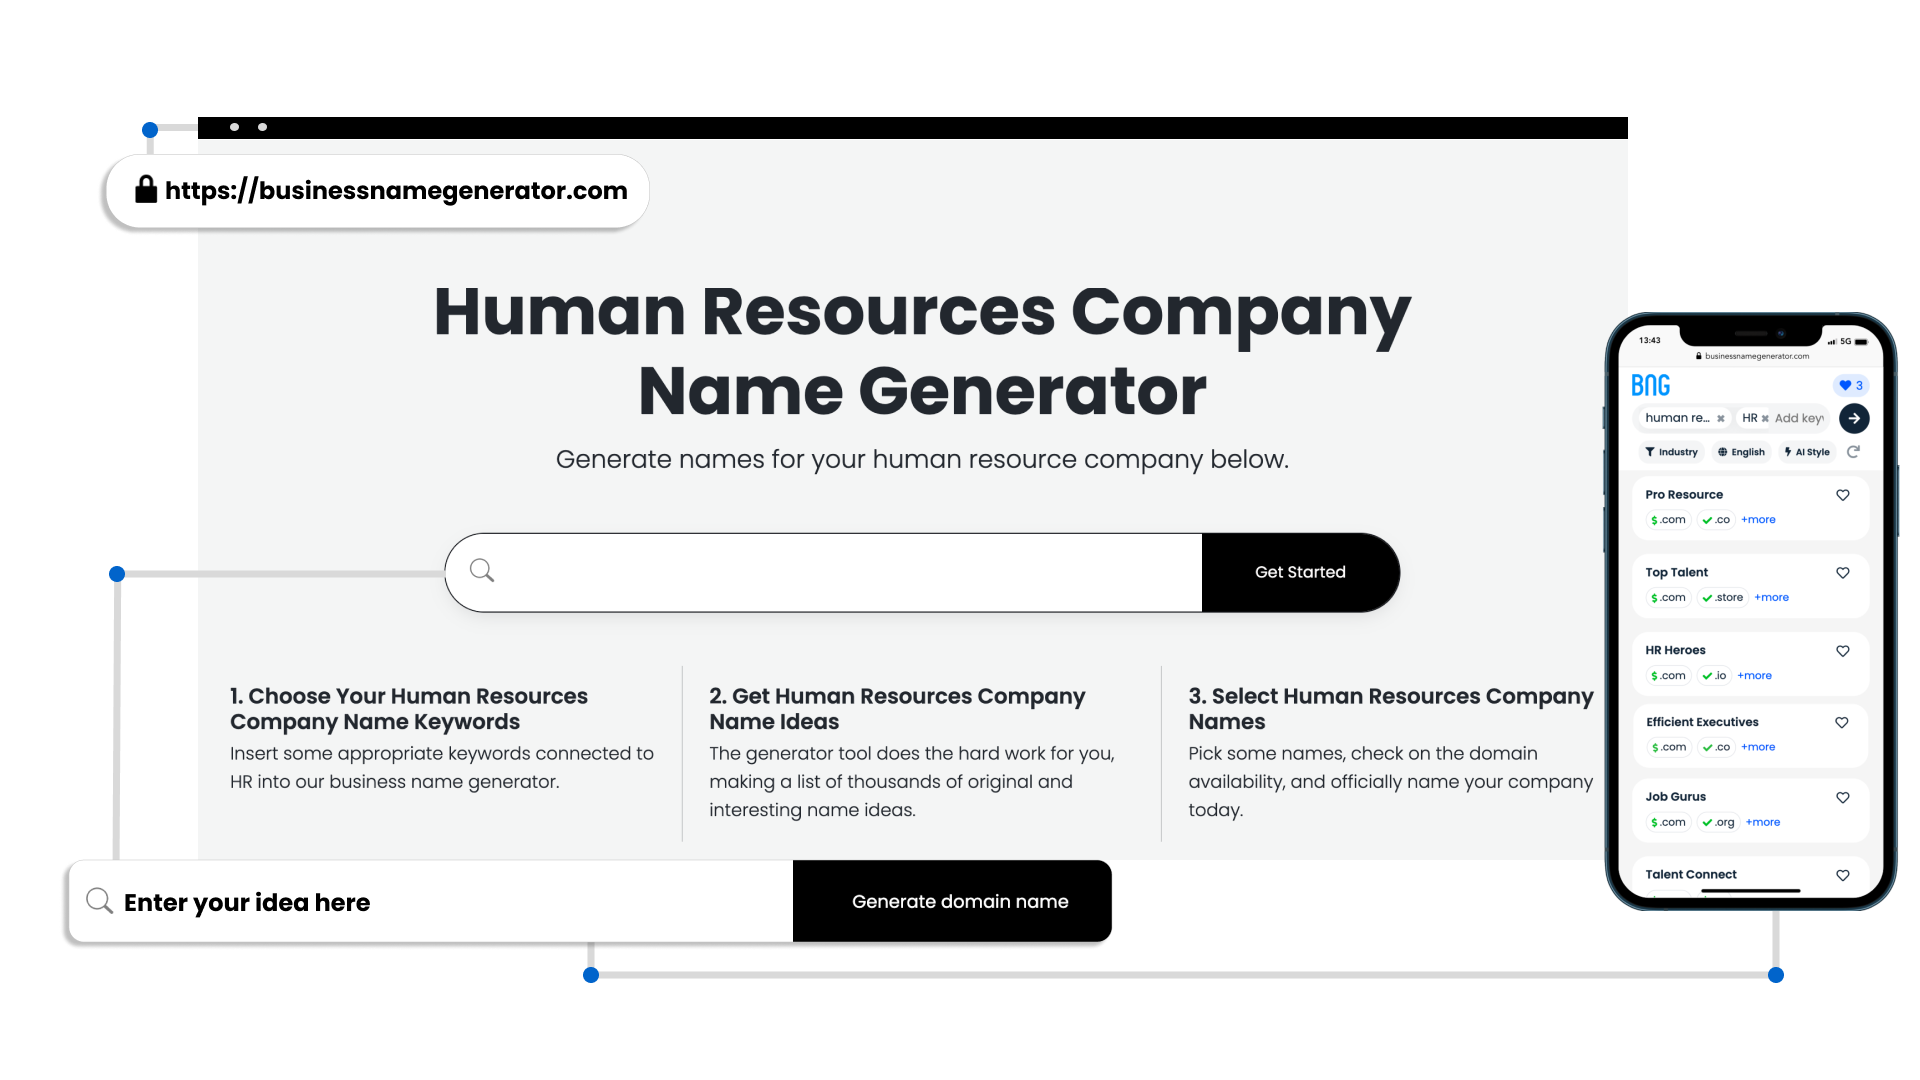 Human Resources Company Name Generator Features